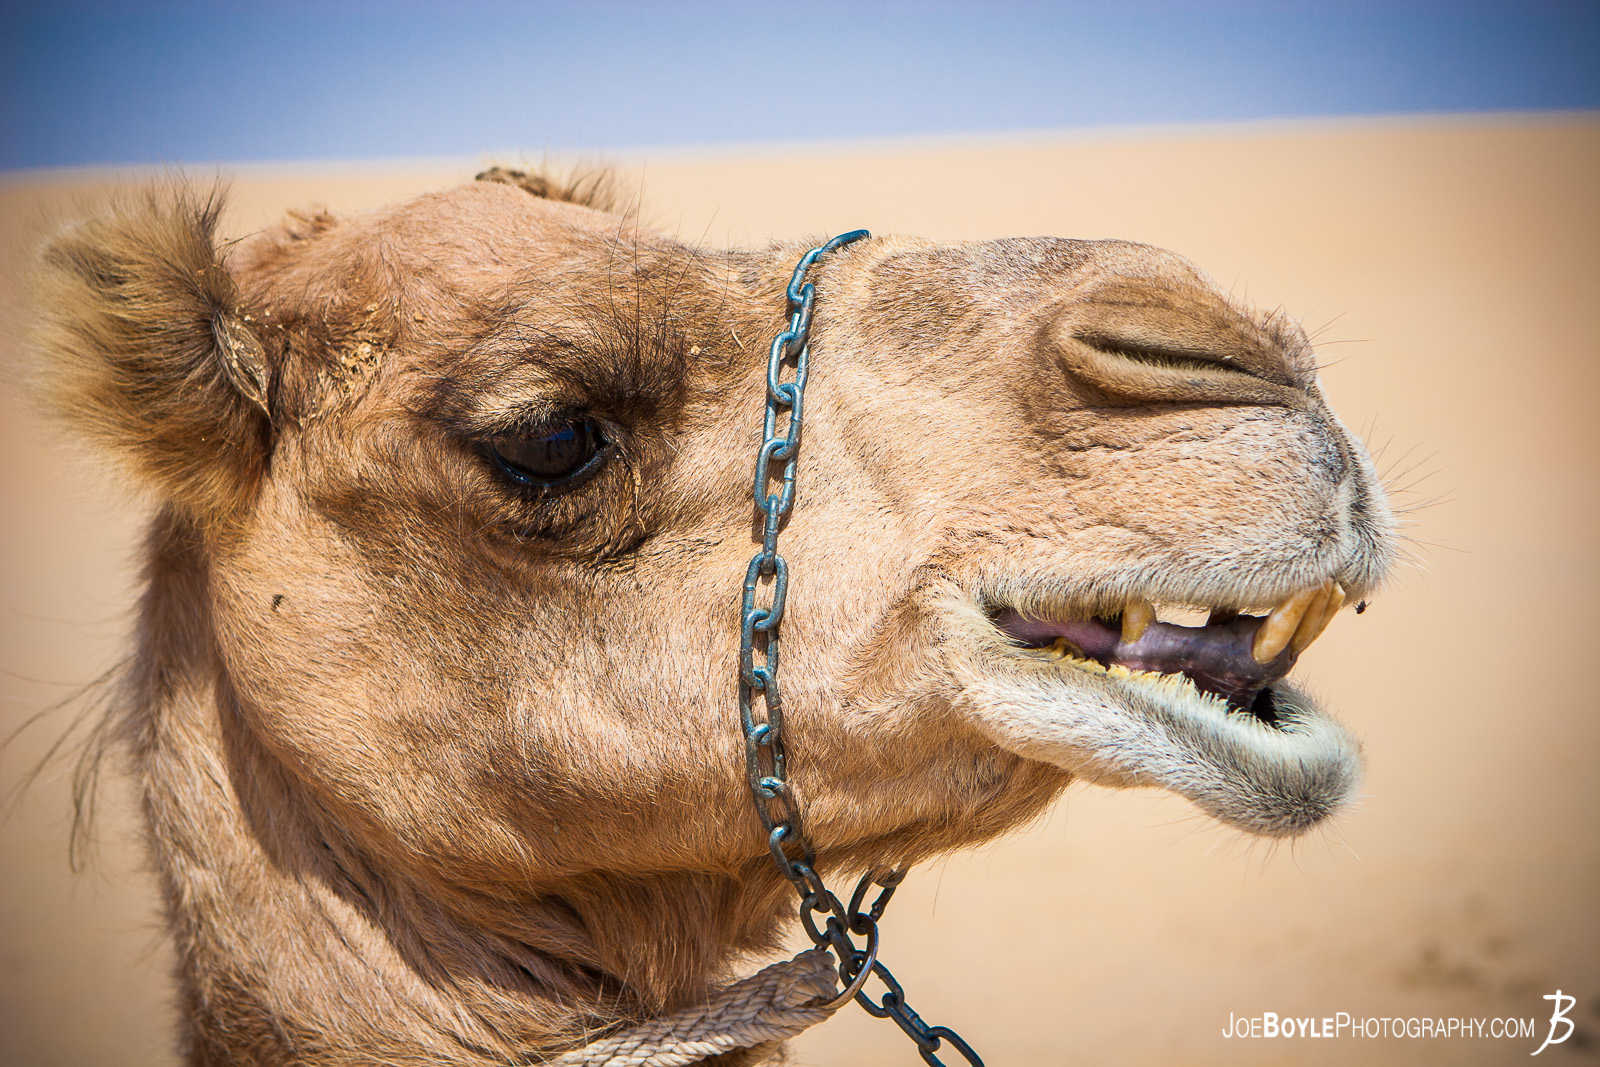  I was on tour with MegaDeth during their 2012 "Countdown to Extinction" tour. We had a stop over in Dubai, UAE and we had an opportunity to go on a desert safari where I was able to photograph this camel! 